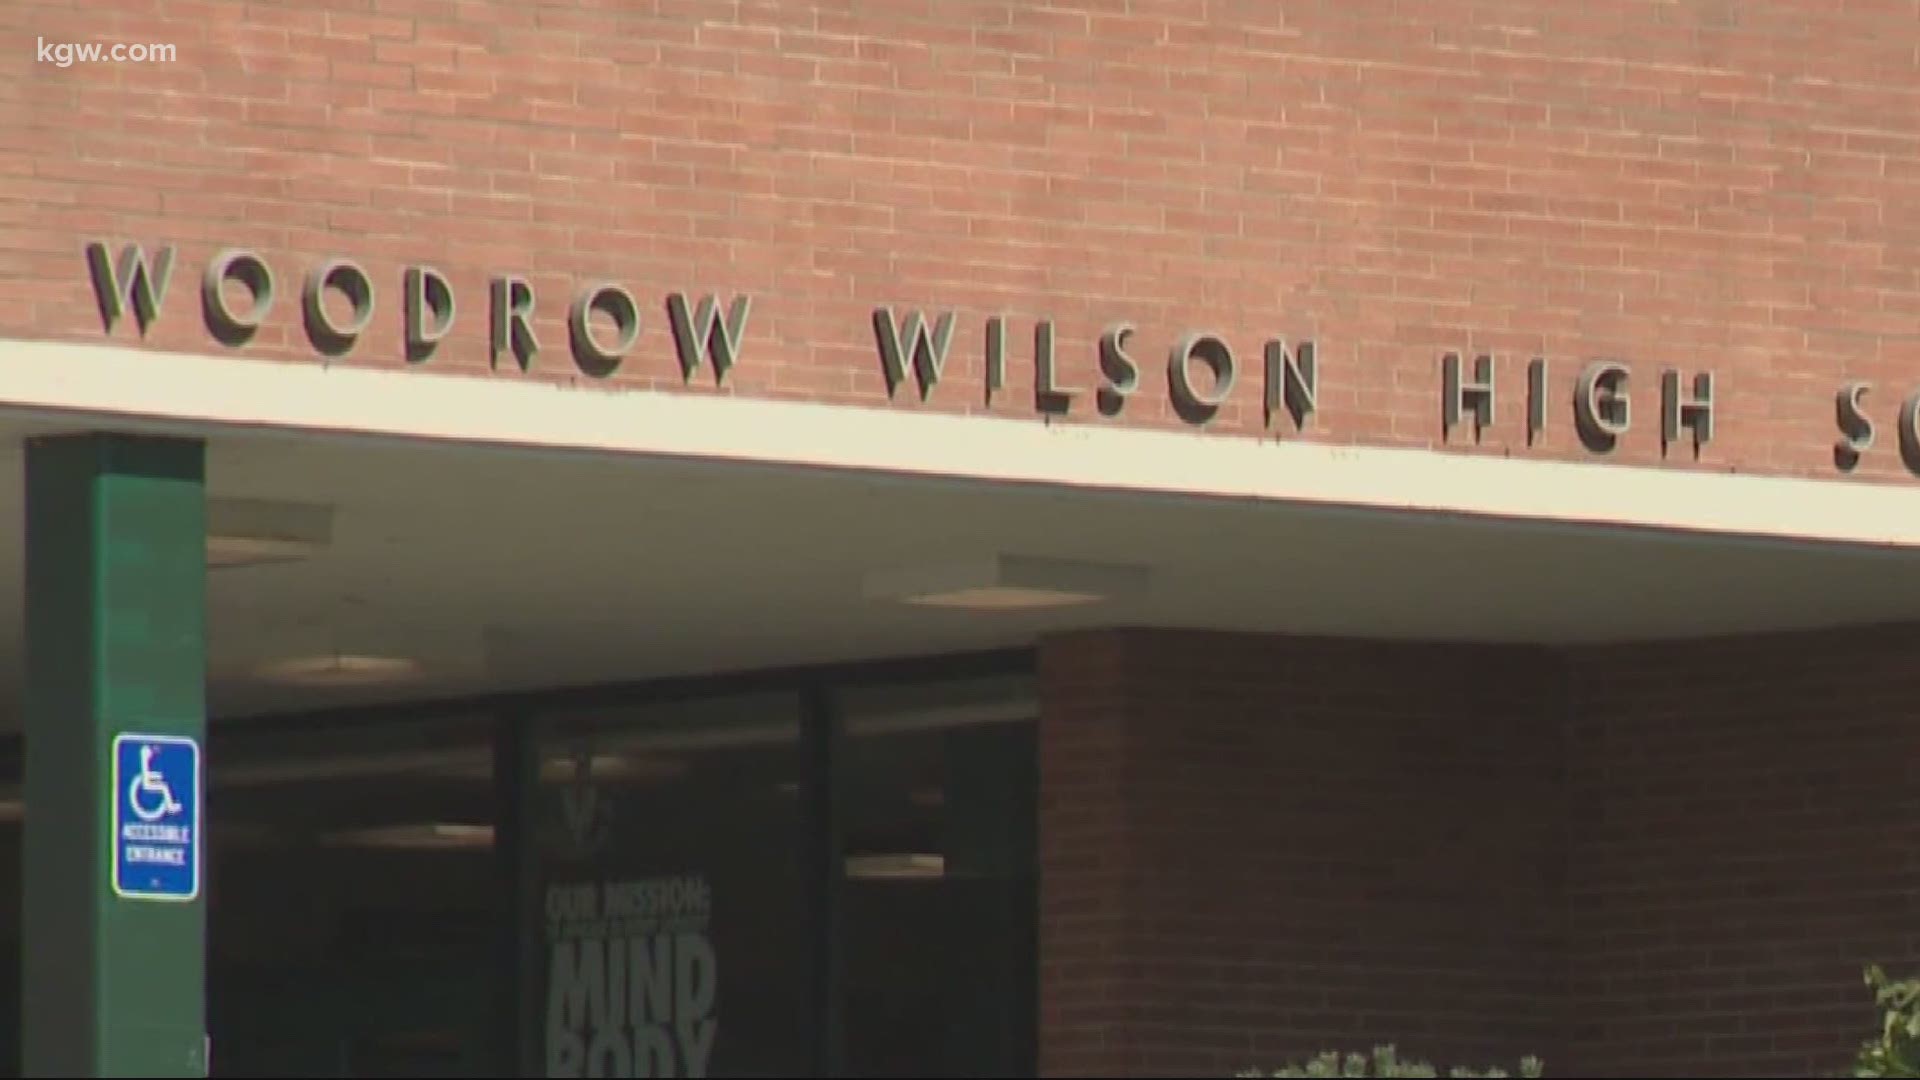 Portland Public Schools said they plan to change the name of Wilson High School and possibly others.